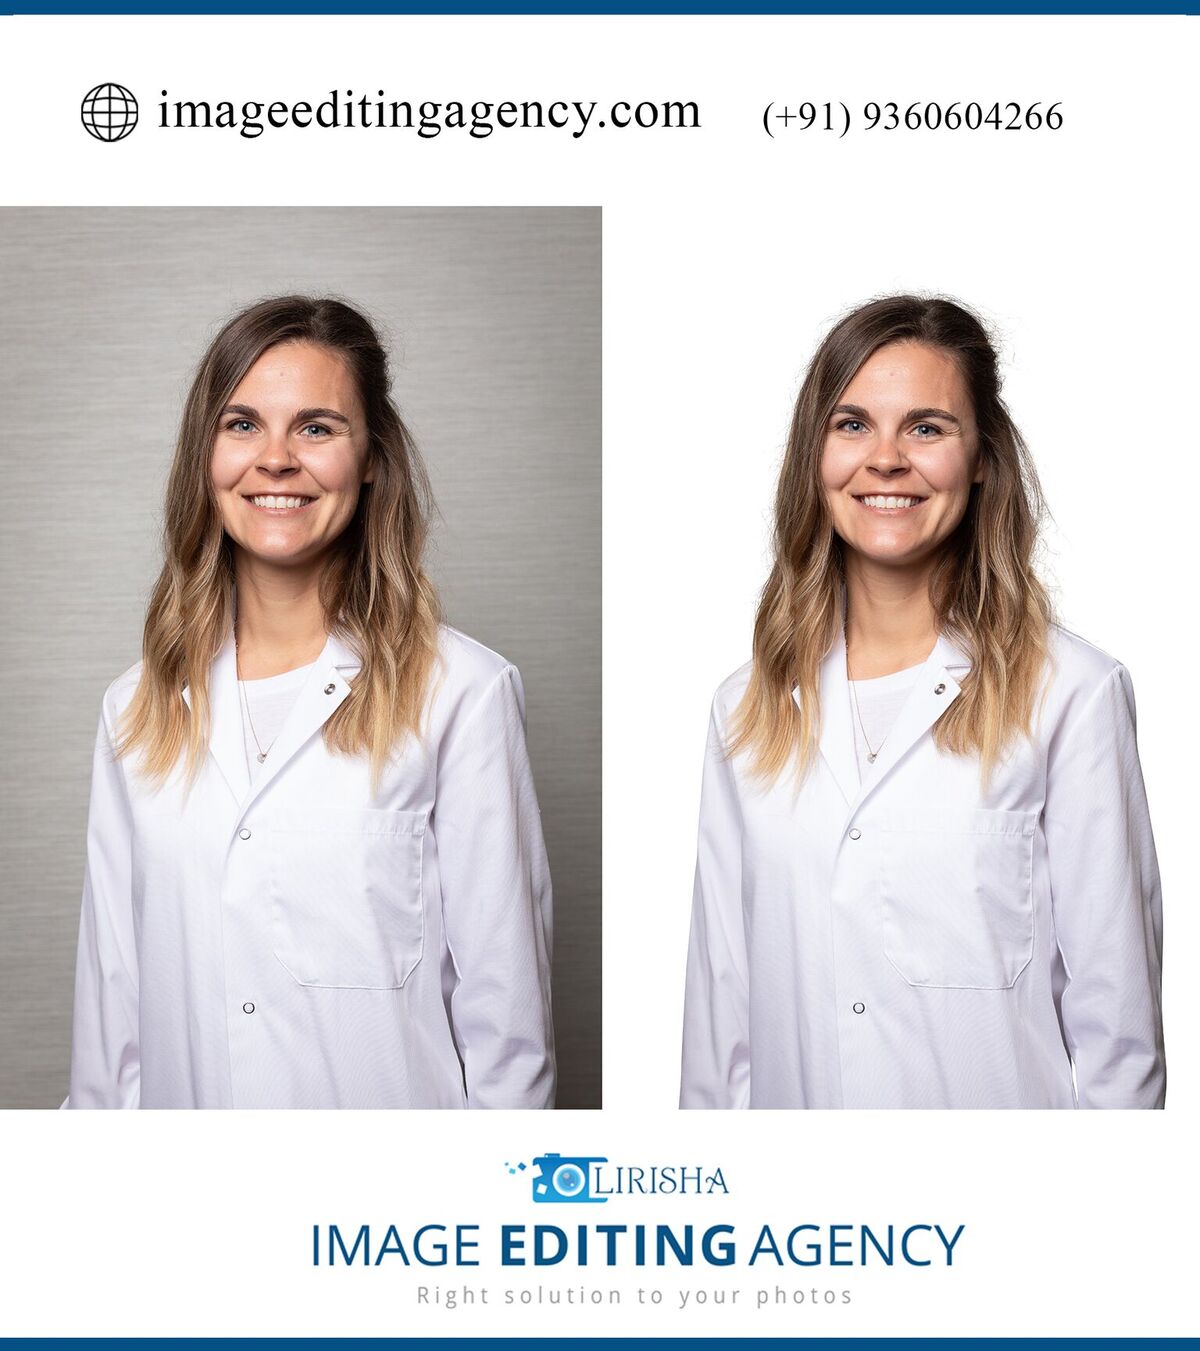 Photo Editing Services & Image Editing in USA